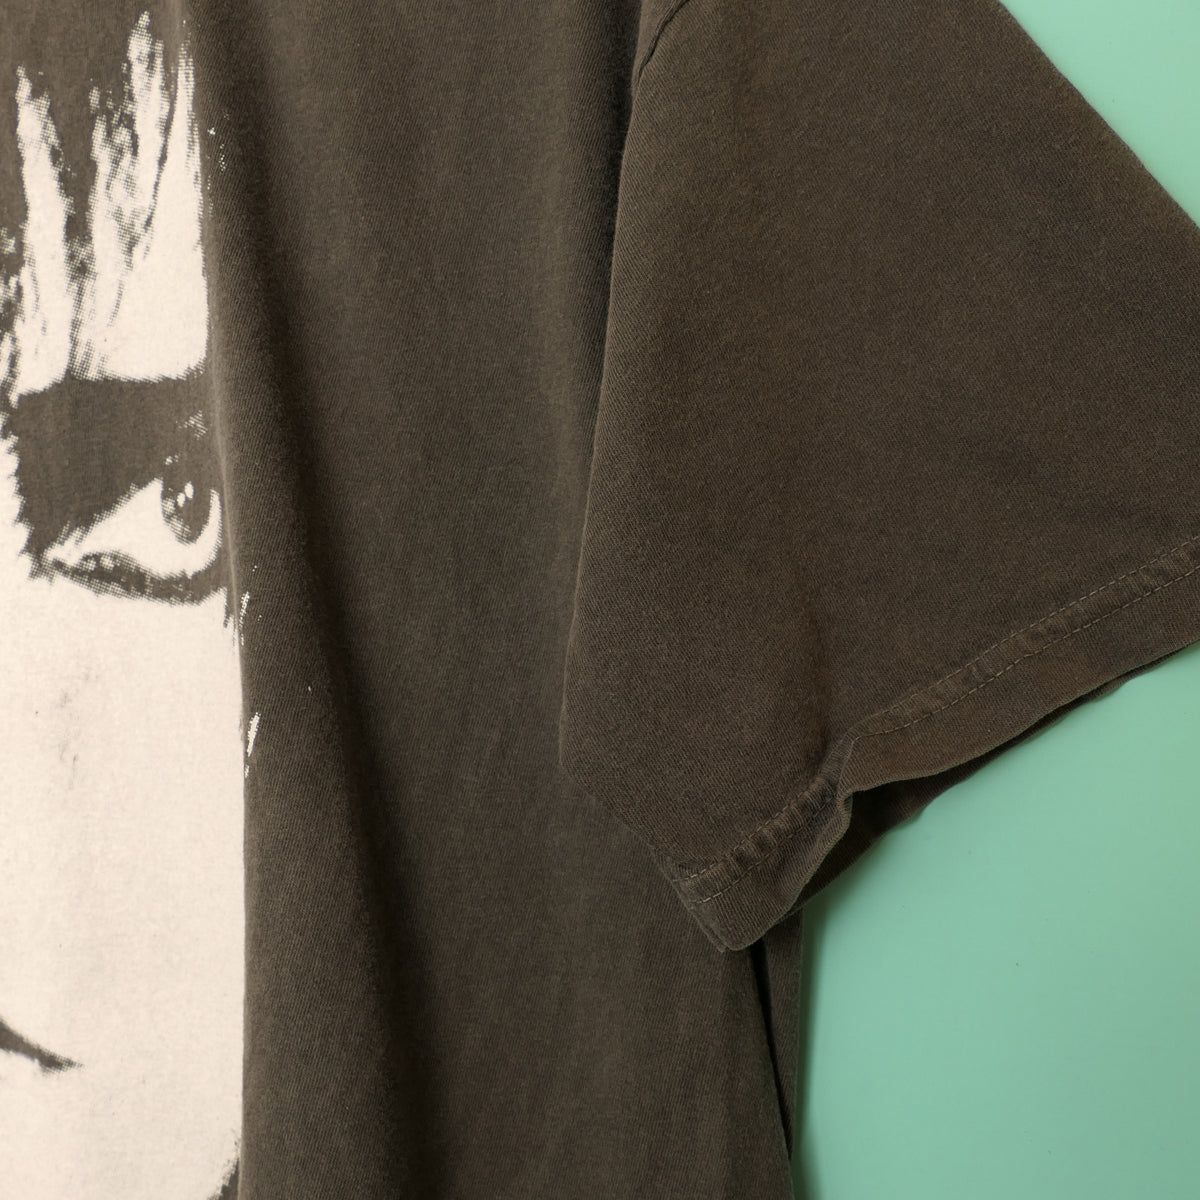 Siouxsie And The Banshees Tee